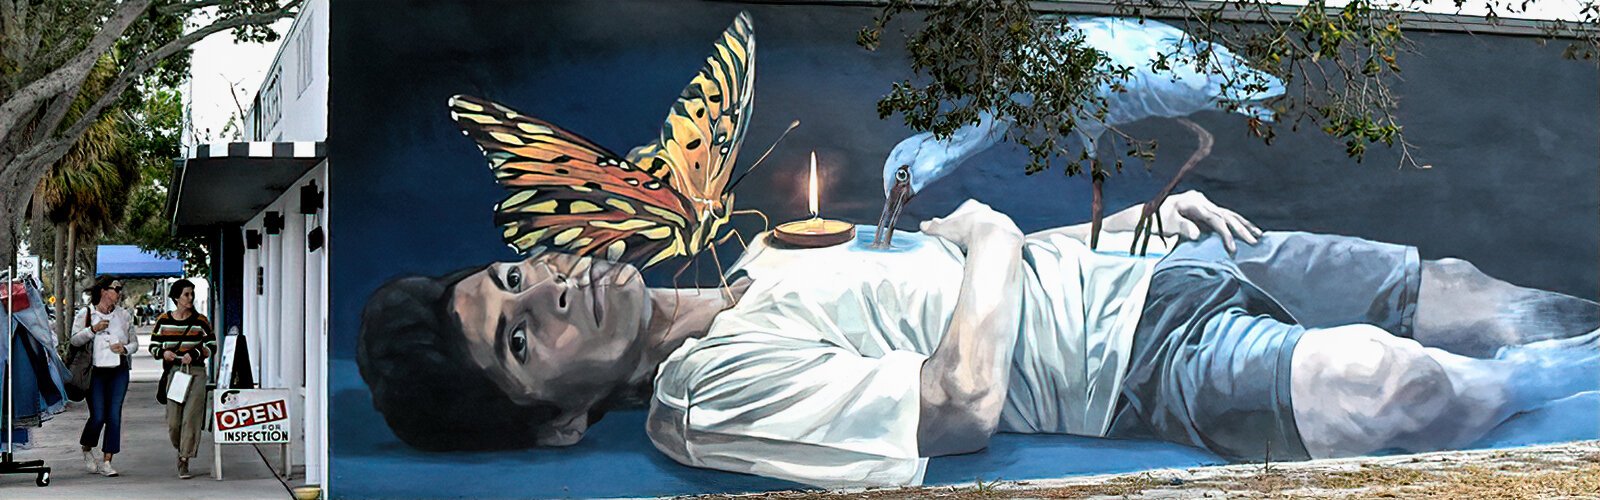 The Grand Central District offers some of the best mural-spotting in St Pete. “El Templo – Find the Light” is a startling mural by Peru-based fine artist and muralist Jade Rivera.